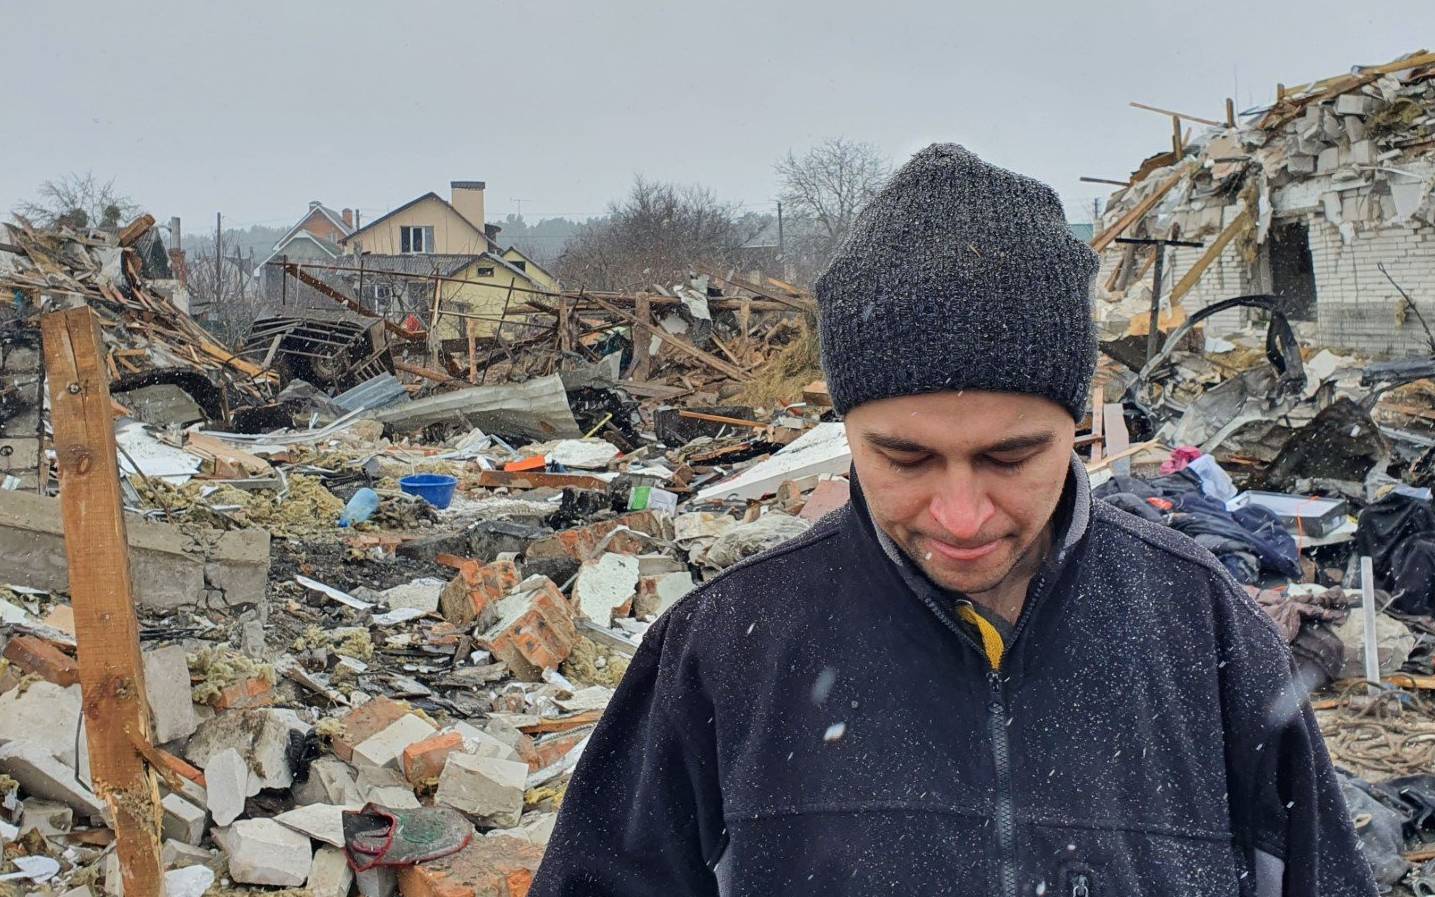 Oleg Rubak, 32, a local engineer who lost his wife Katia, 29, in the shelling, stands on the rubble of his house in Zhytomyr on March 02, 2022, after it was destroyed by a Russian bombing the day before. - The shelling killed at least 3 people and injured nearly 20 according to locals and local authorities, destroyed a local market and at least 10 houses on March 01, 2022. (Photo by Emmanuel DUPARCQ / AFP)